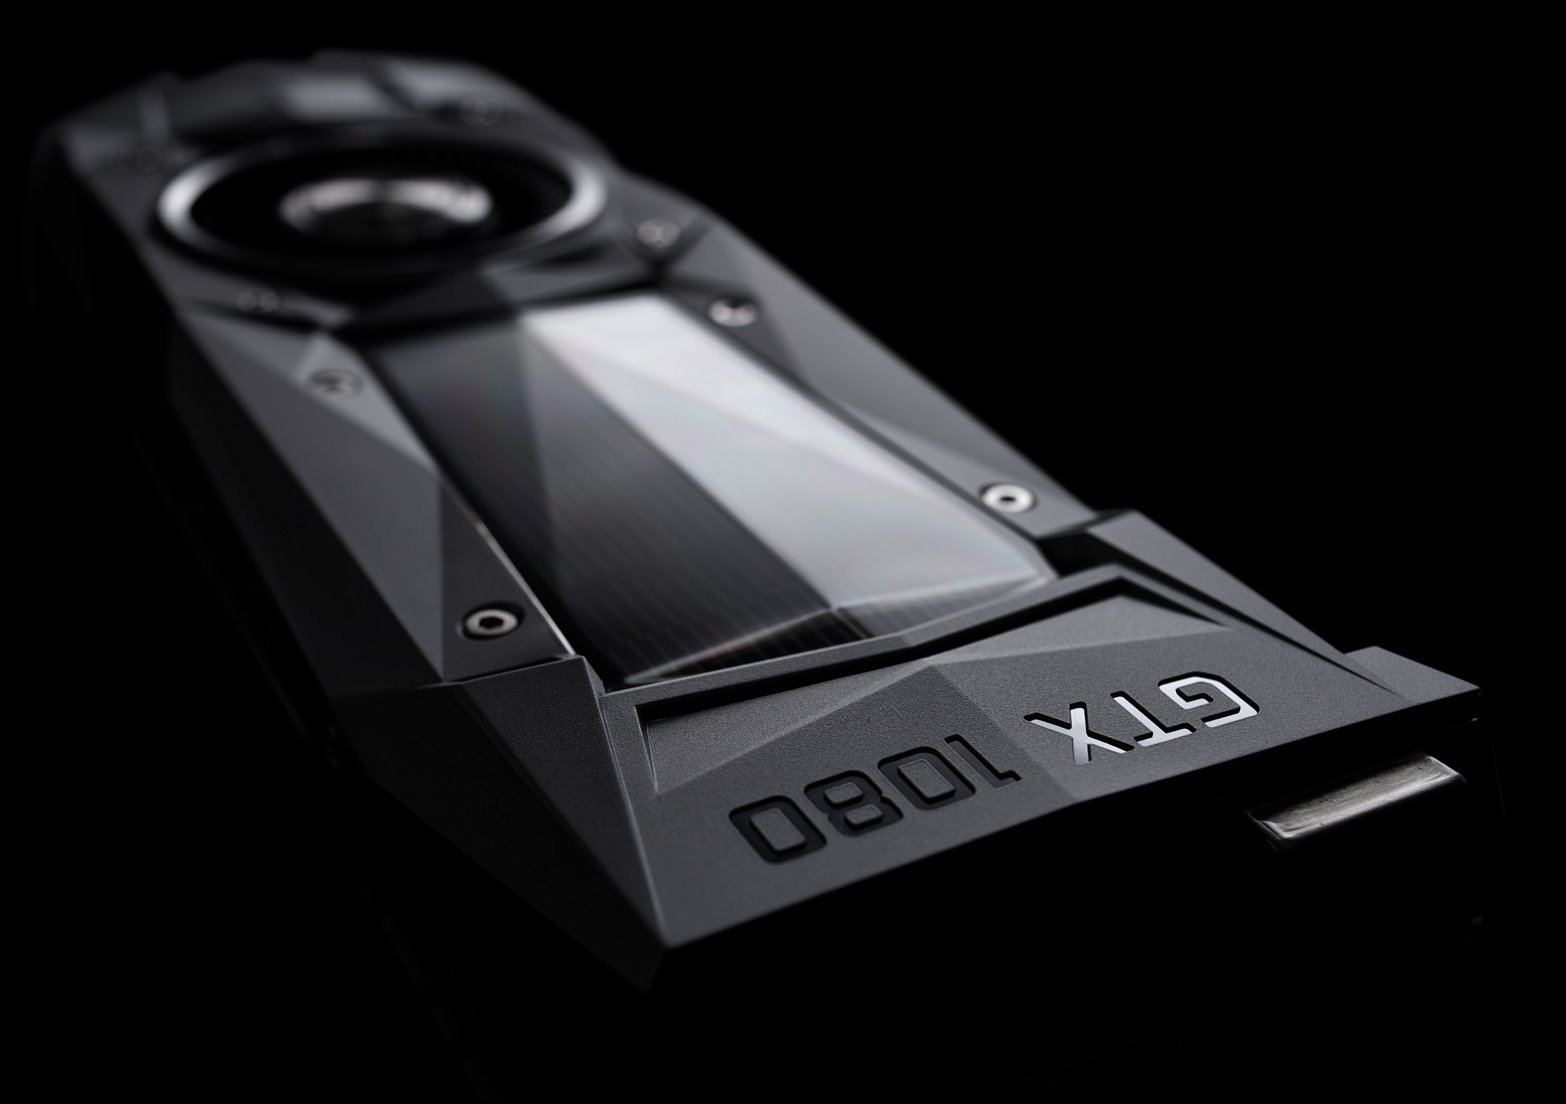 Nvidia GeForce GTX 1080 Review > No Compromise 4K Gaming, Now Feasible?